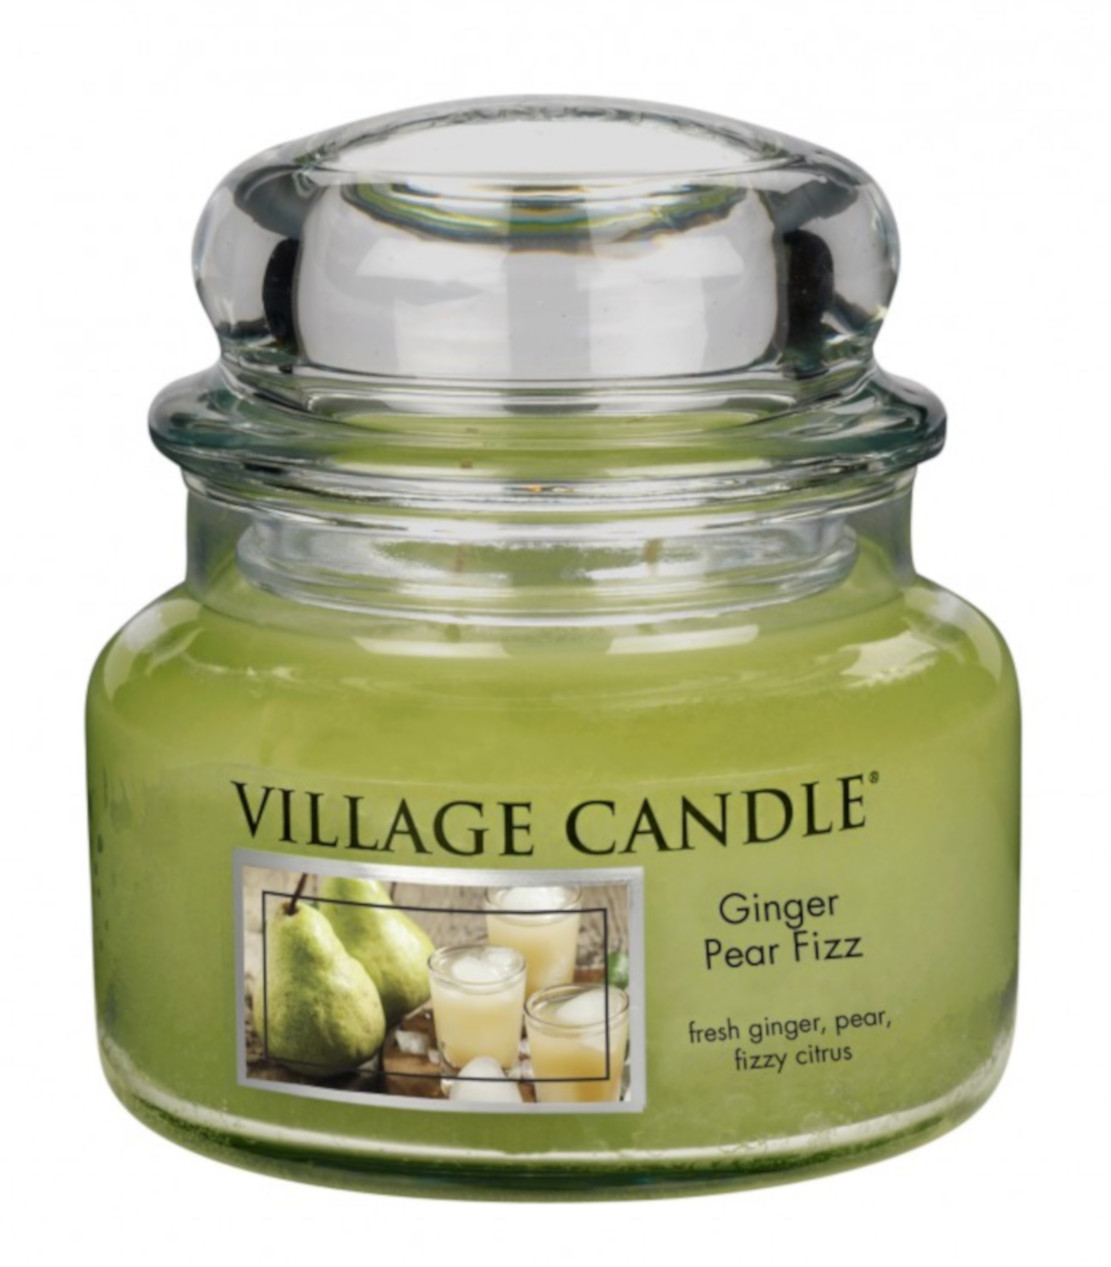 Village Candle Ginger Pear Fizz Small Jar 262g